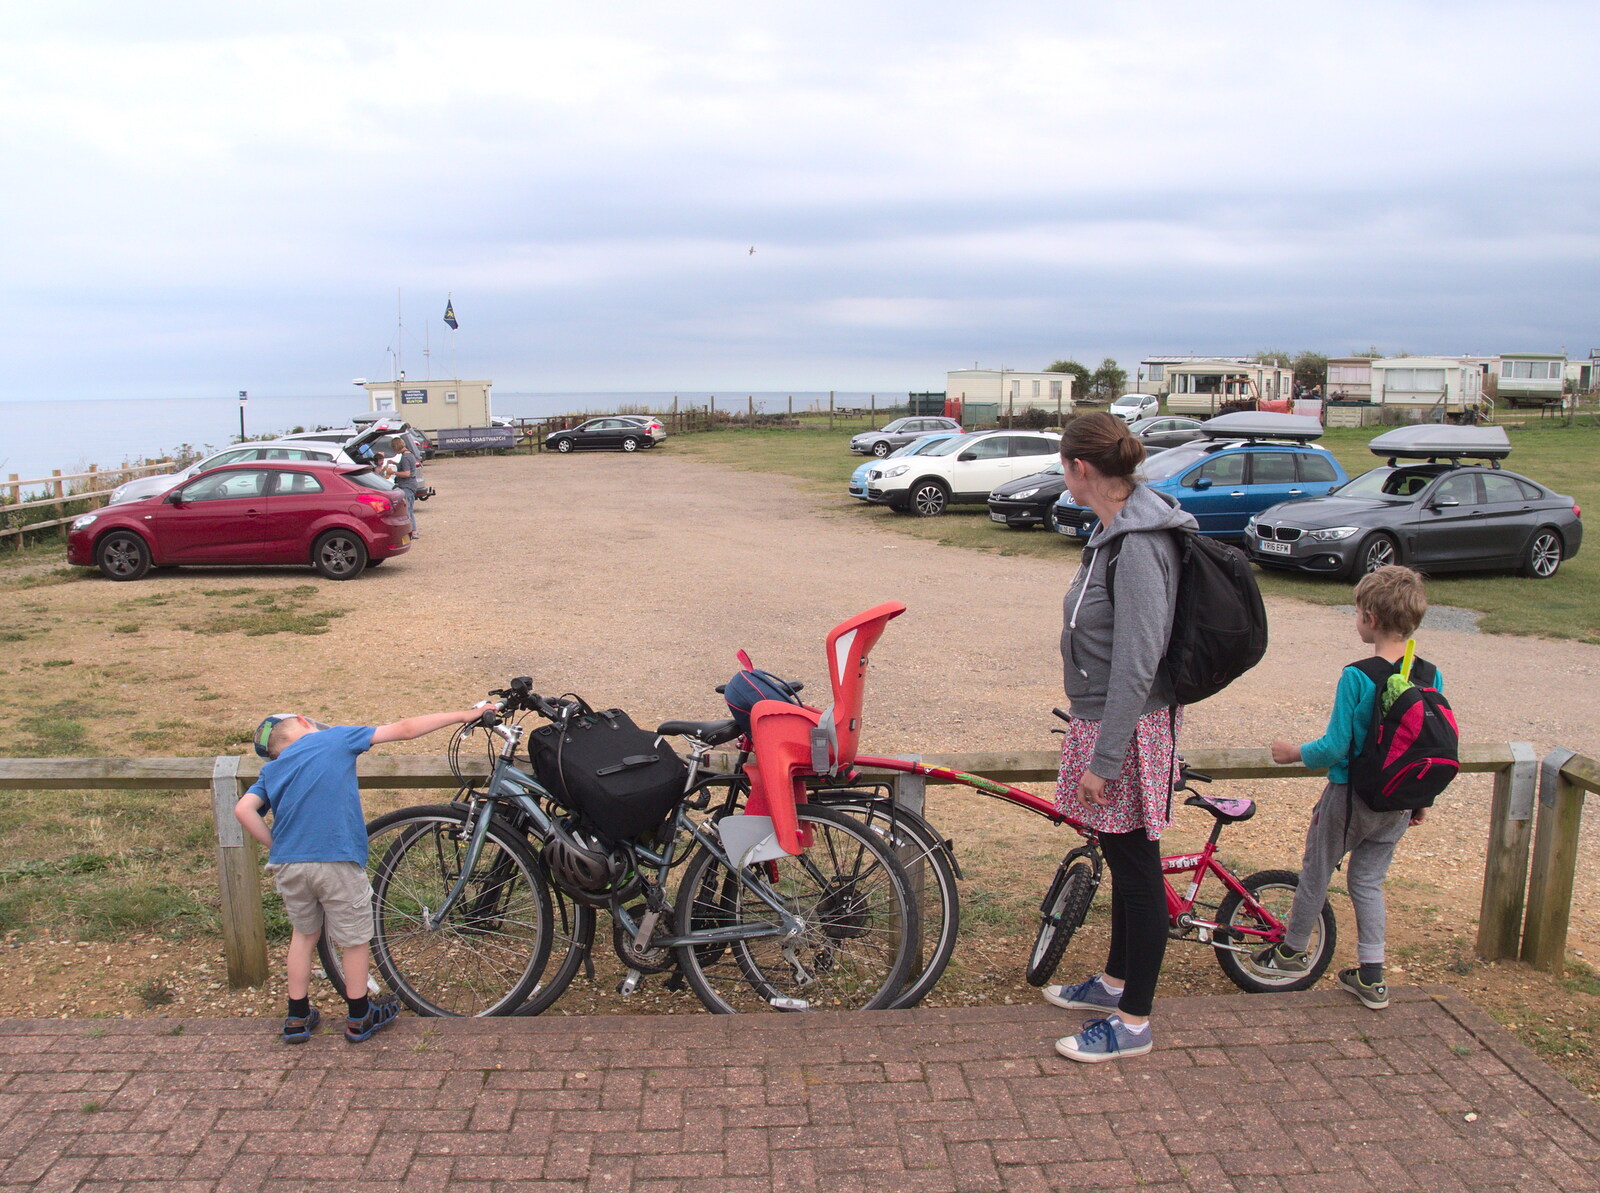 We unlock the bikes from Camping in West Runton, North Norfolk - 30th July 2016